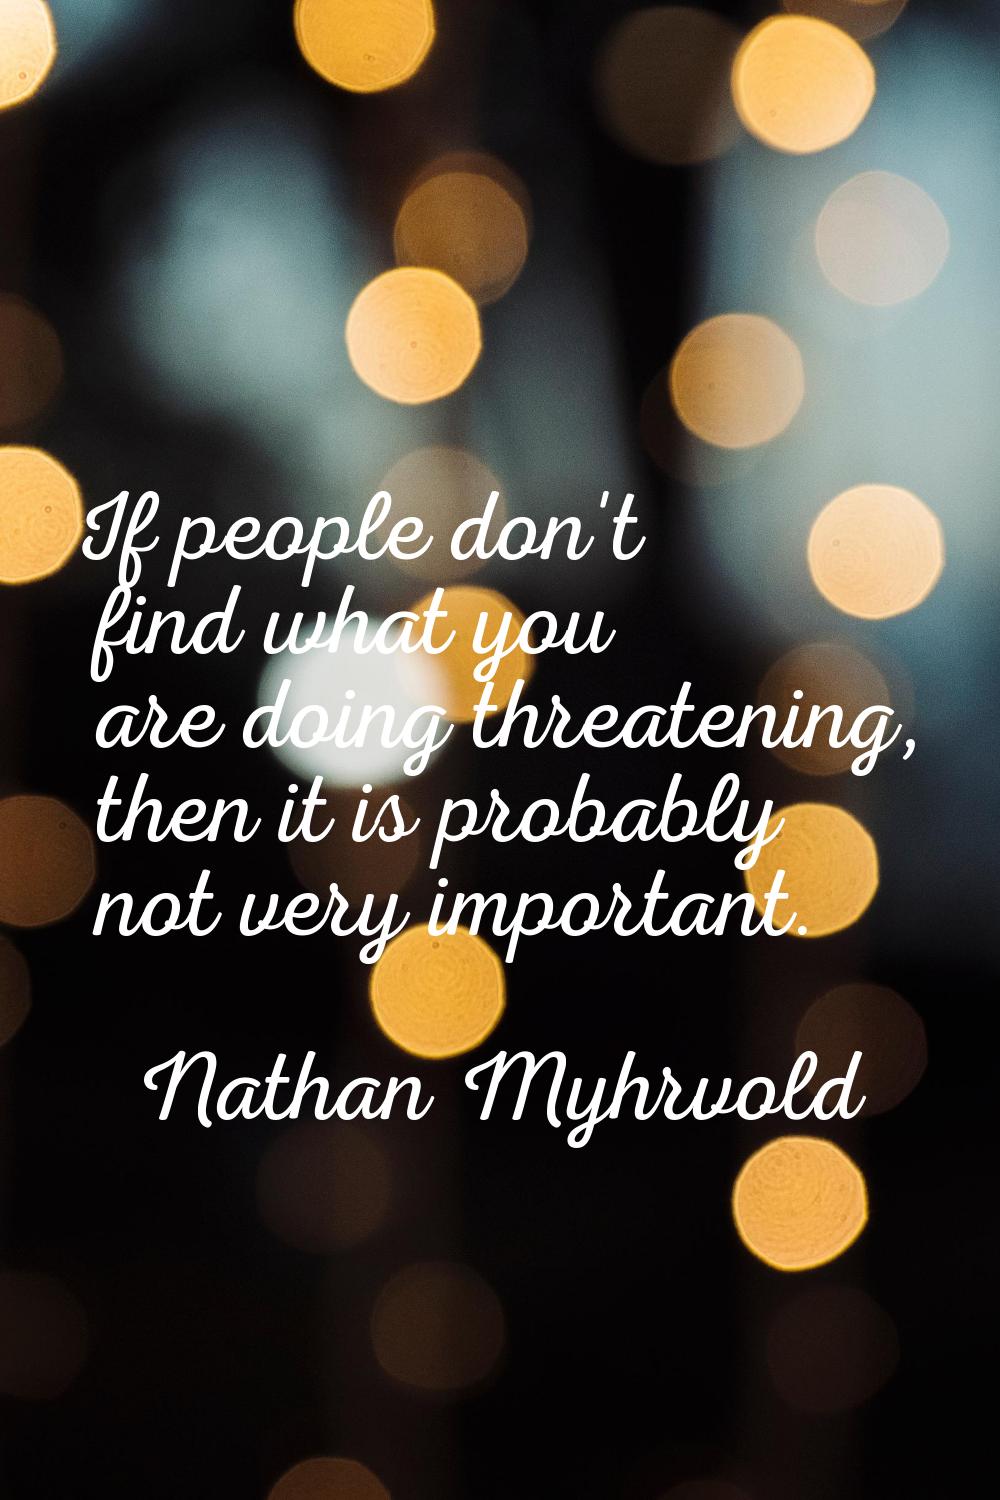 If people don't find what you are doing threatening, then it is probably not very important.